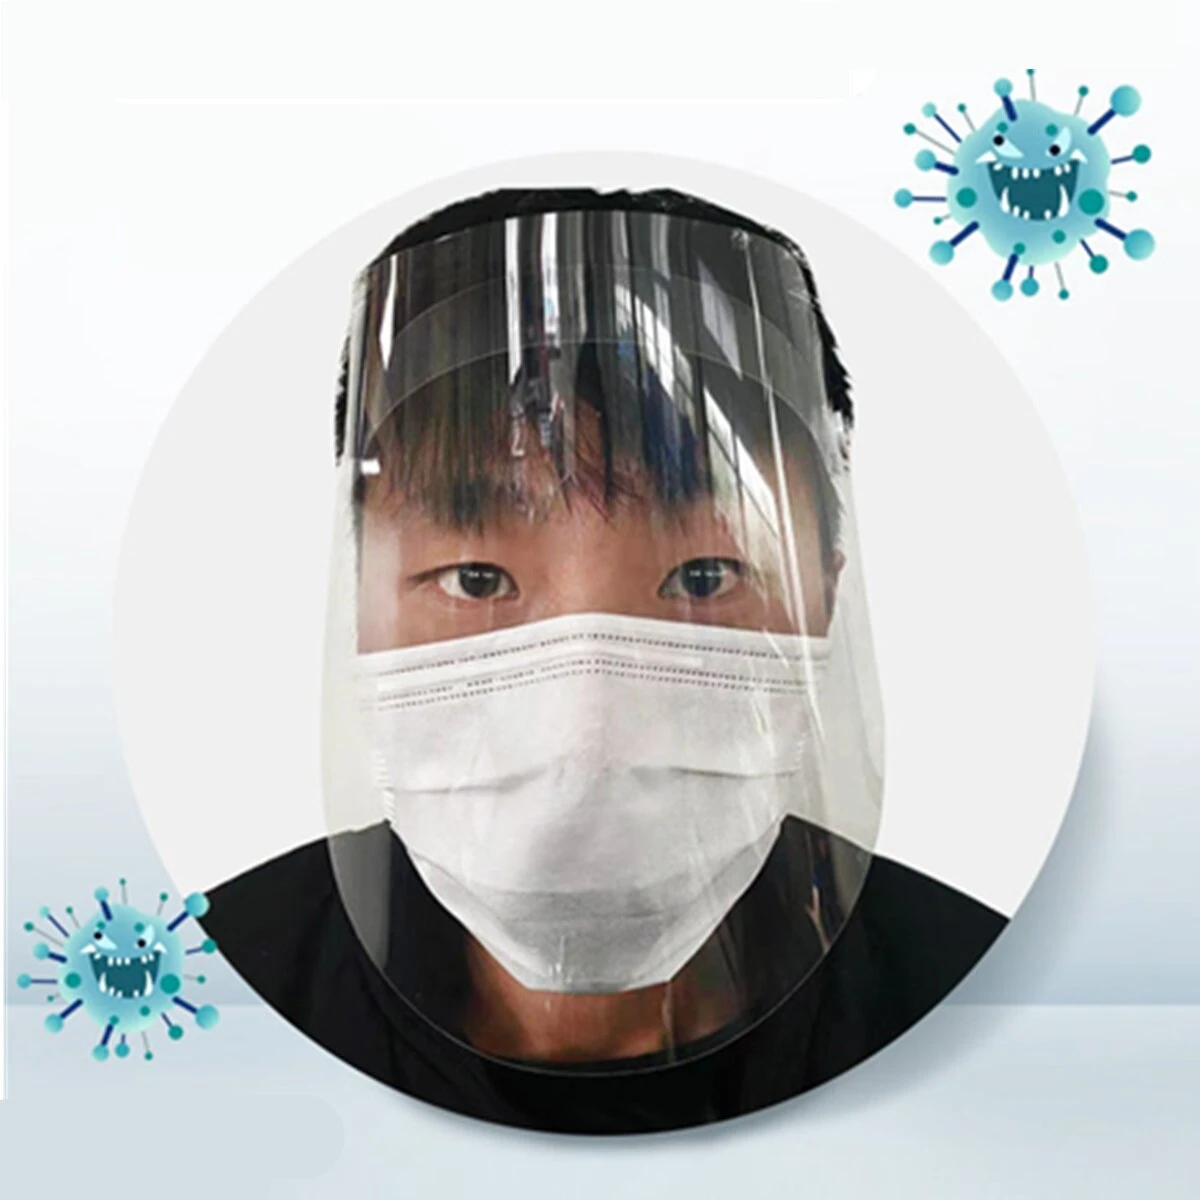 Pvc transparent breathable splash-proof dustproof full face mask disassembleable for all hats fishman hats anti-fog anti-spit face shield